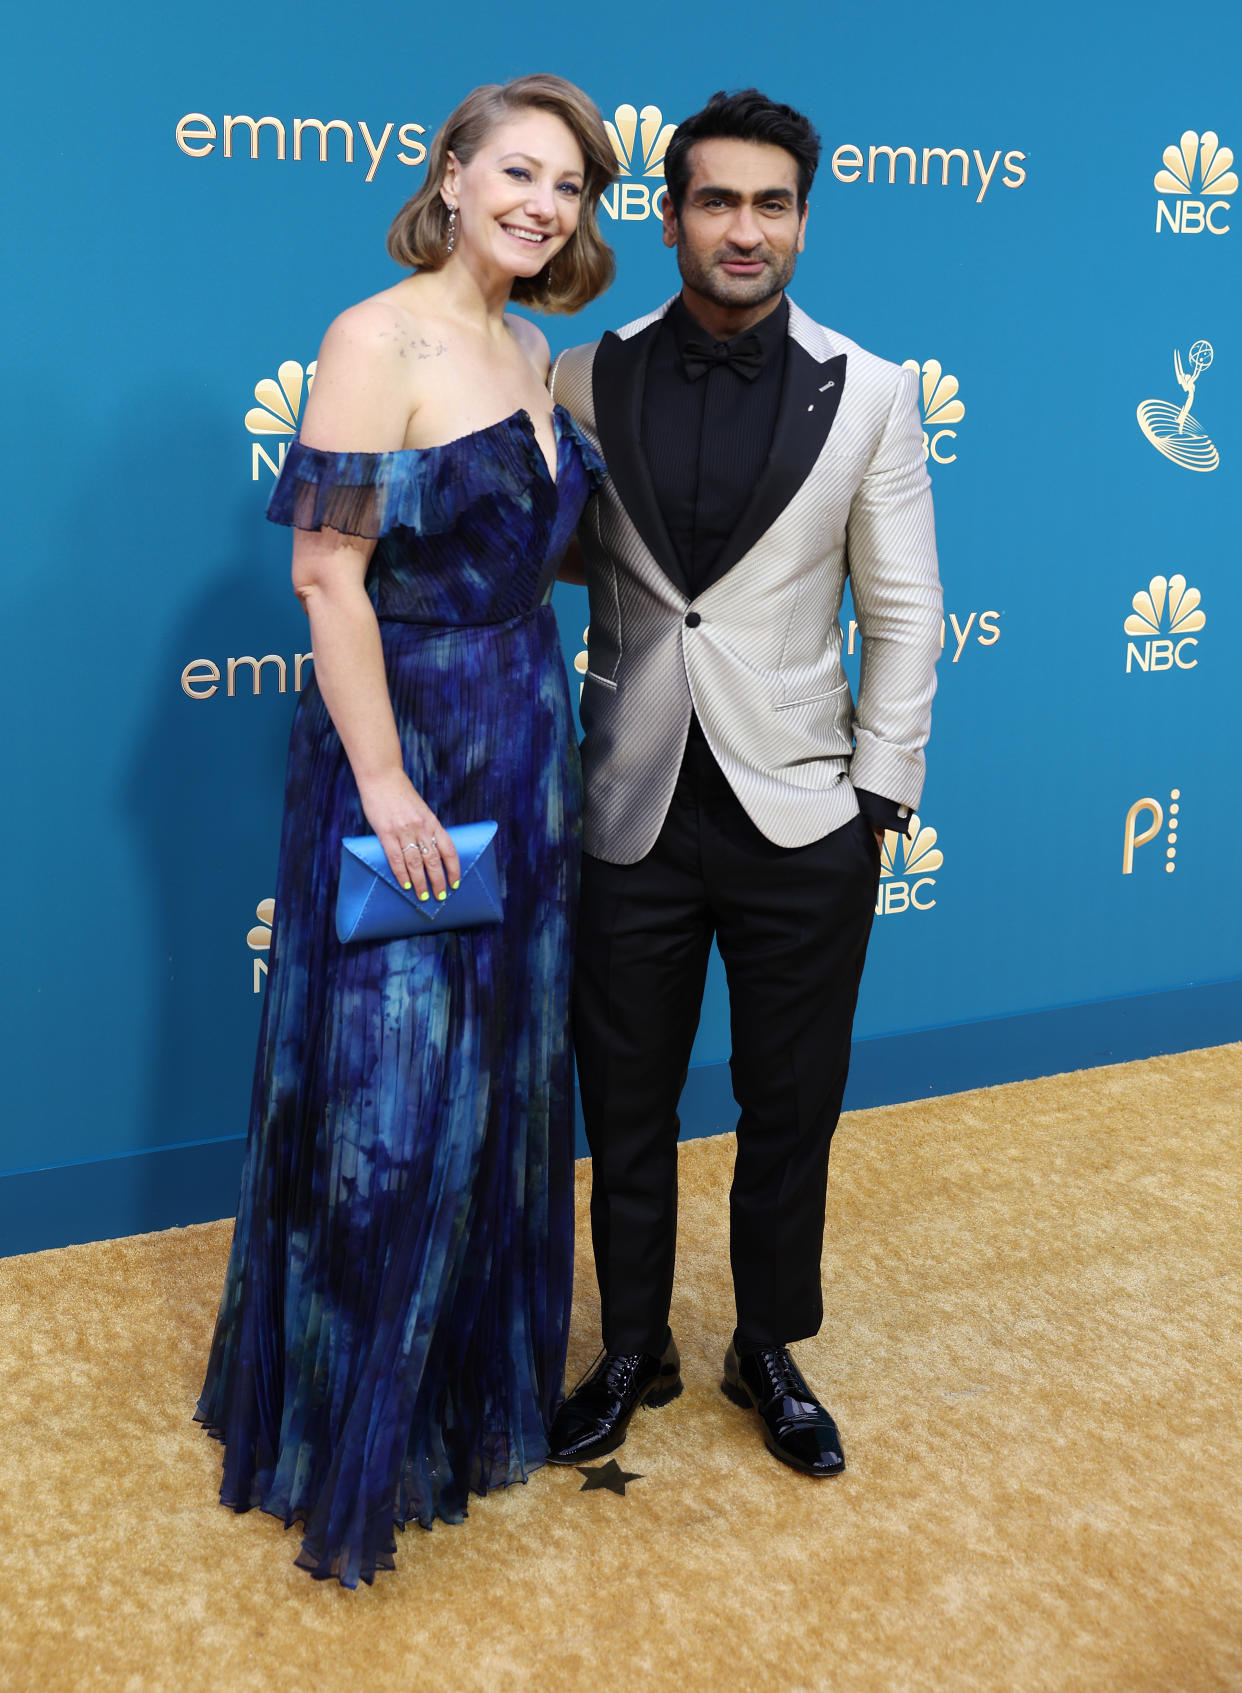 LOS ANGELES, CA - September 12, 2022 -      Emily Gordon and Kumail Nanjiani arriving at the 74th Primetime Emmy Awards at the Microsoft Theater on Monday, September 12, 2022 (Brian van der Brug / Los Angeles Times via Getty Images)